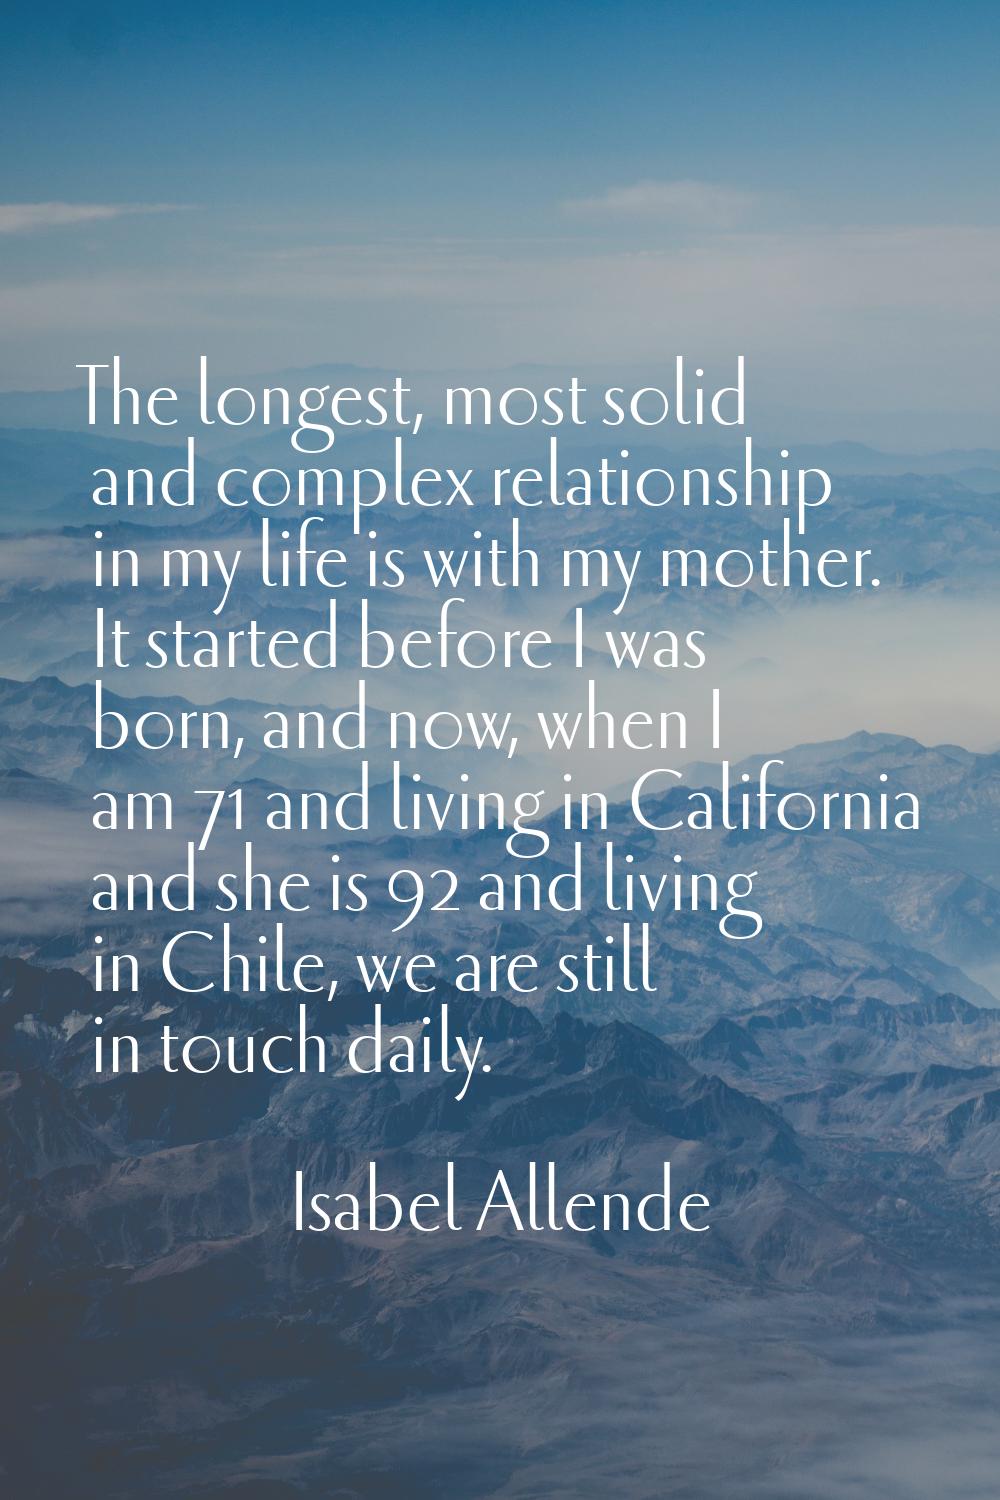 The longest, most solid and complex relationship in my life is with my mother. It started before I 